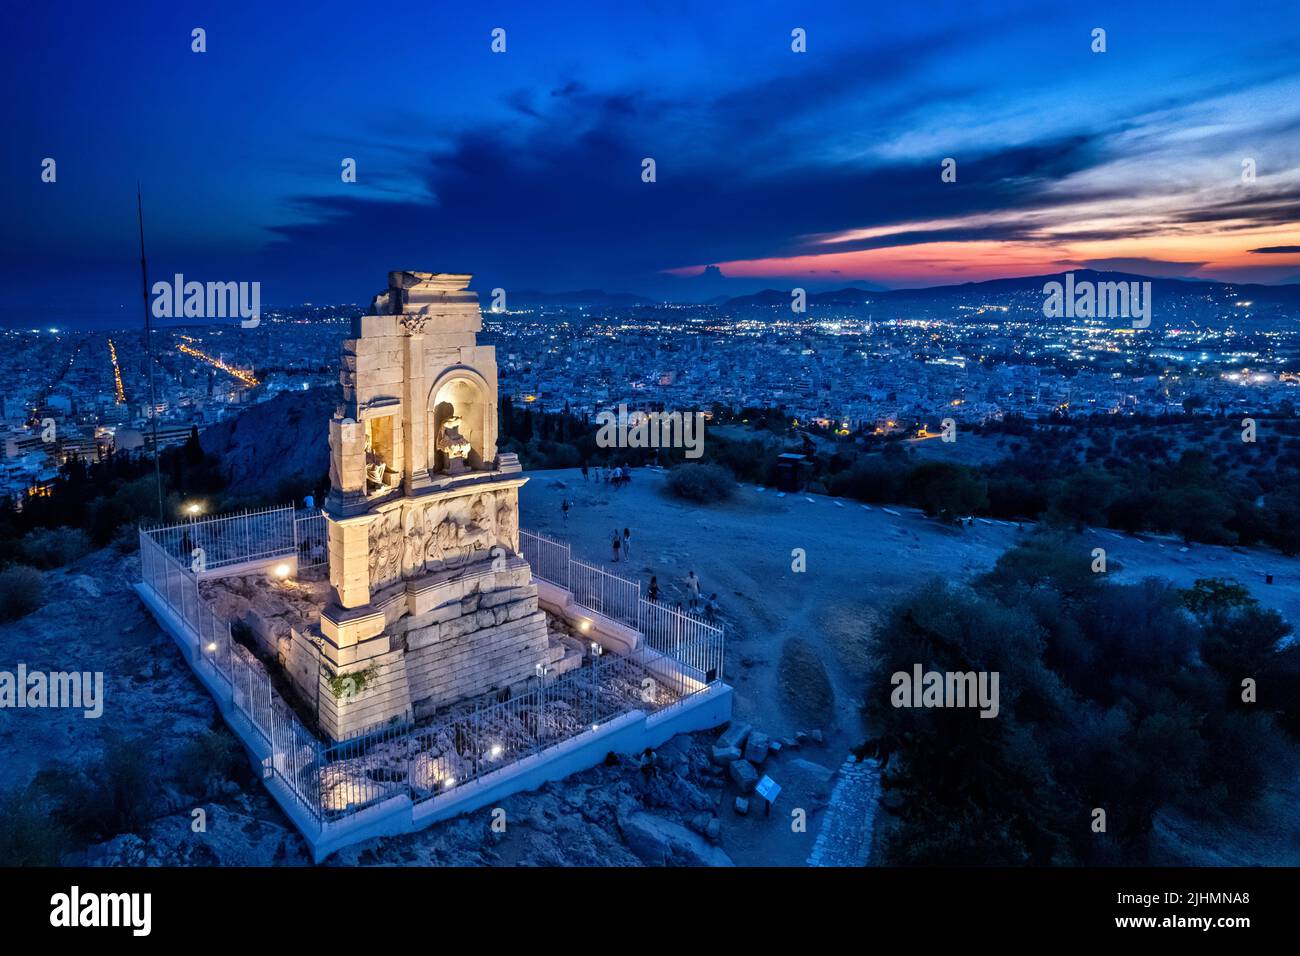 The Philopappos monument on Philopappos hill, 'opposite' of the Acropolis of Athens, Greece. Stock Photo